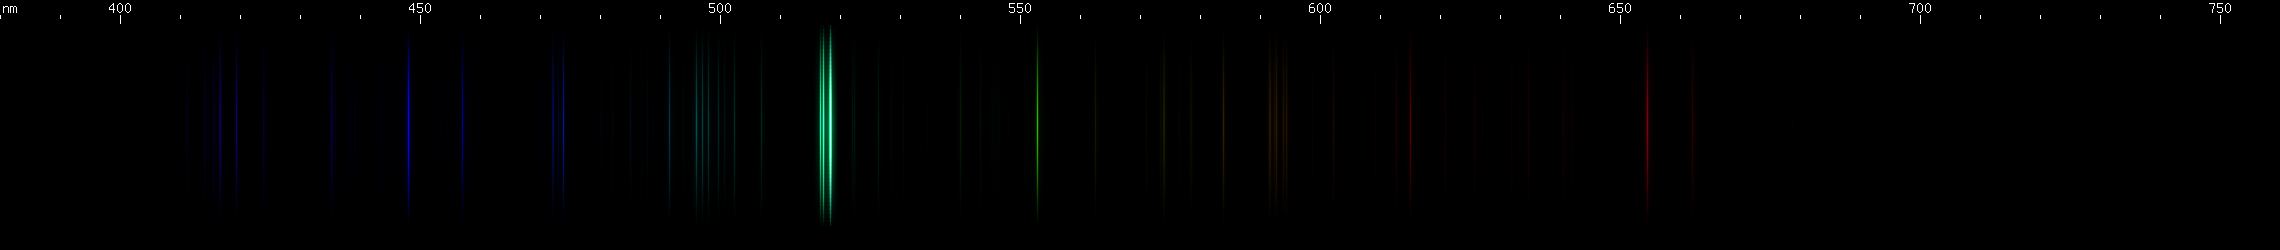 Spectral lines of Magnesium.